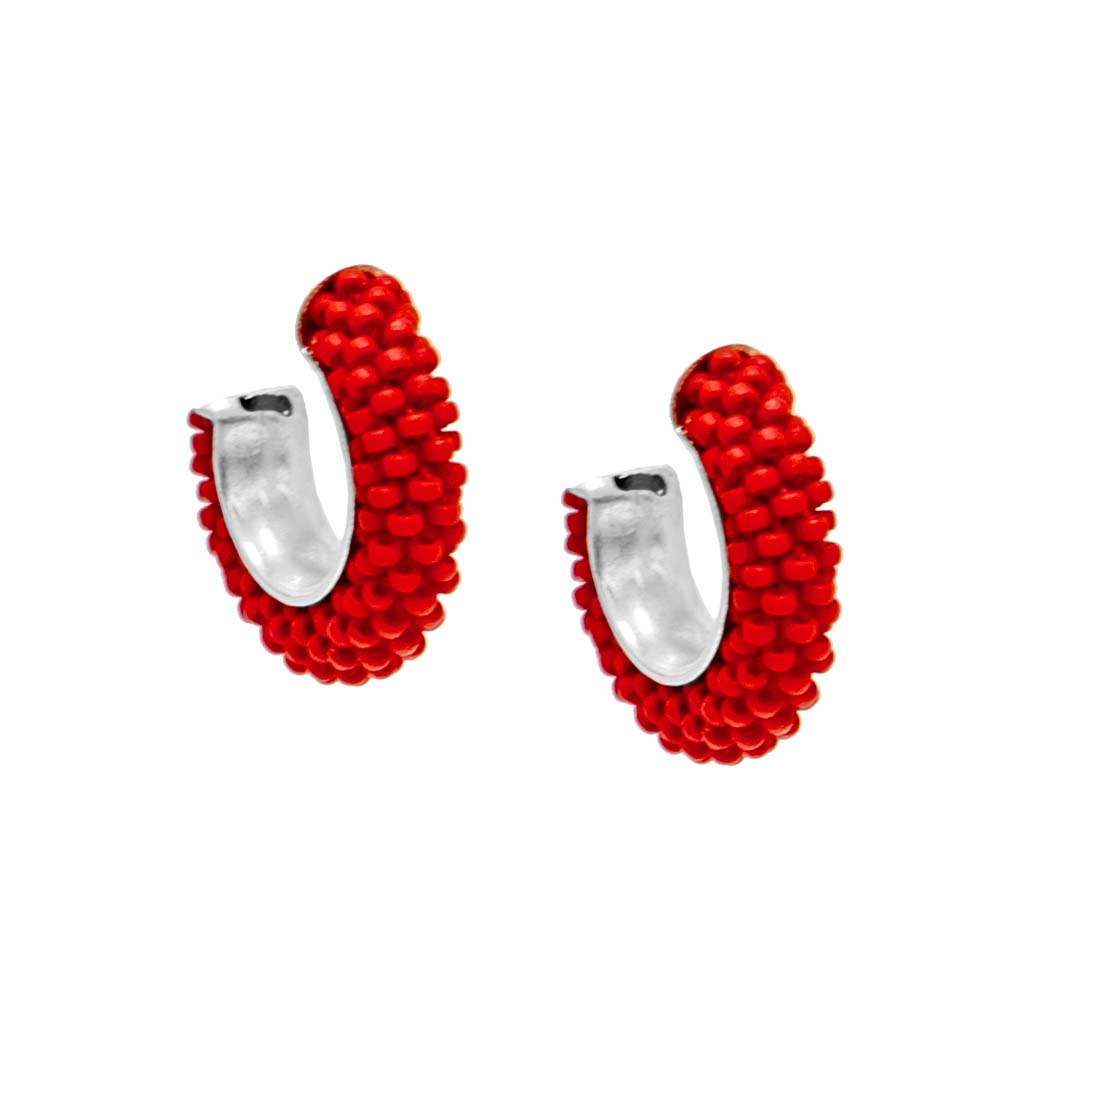 Woven Red Japanese Glass Bead Hoops